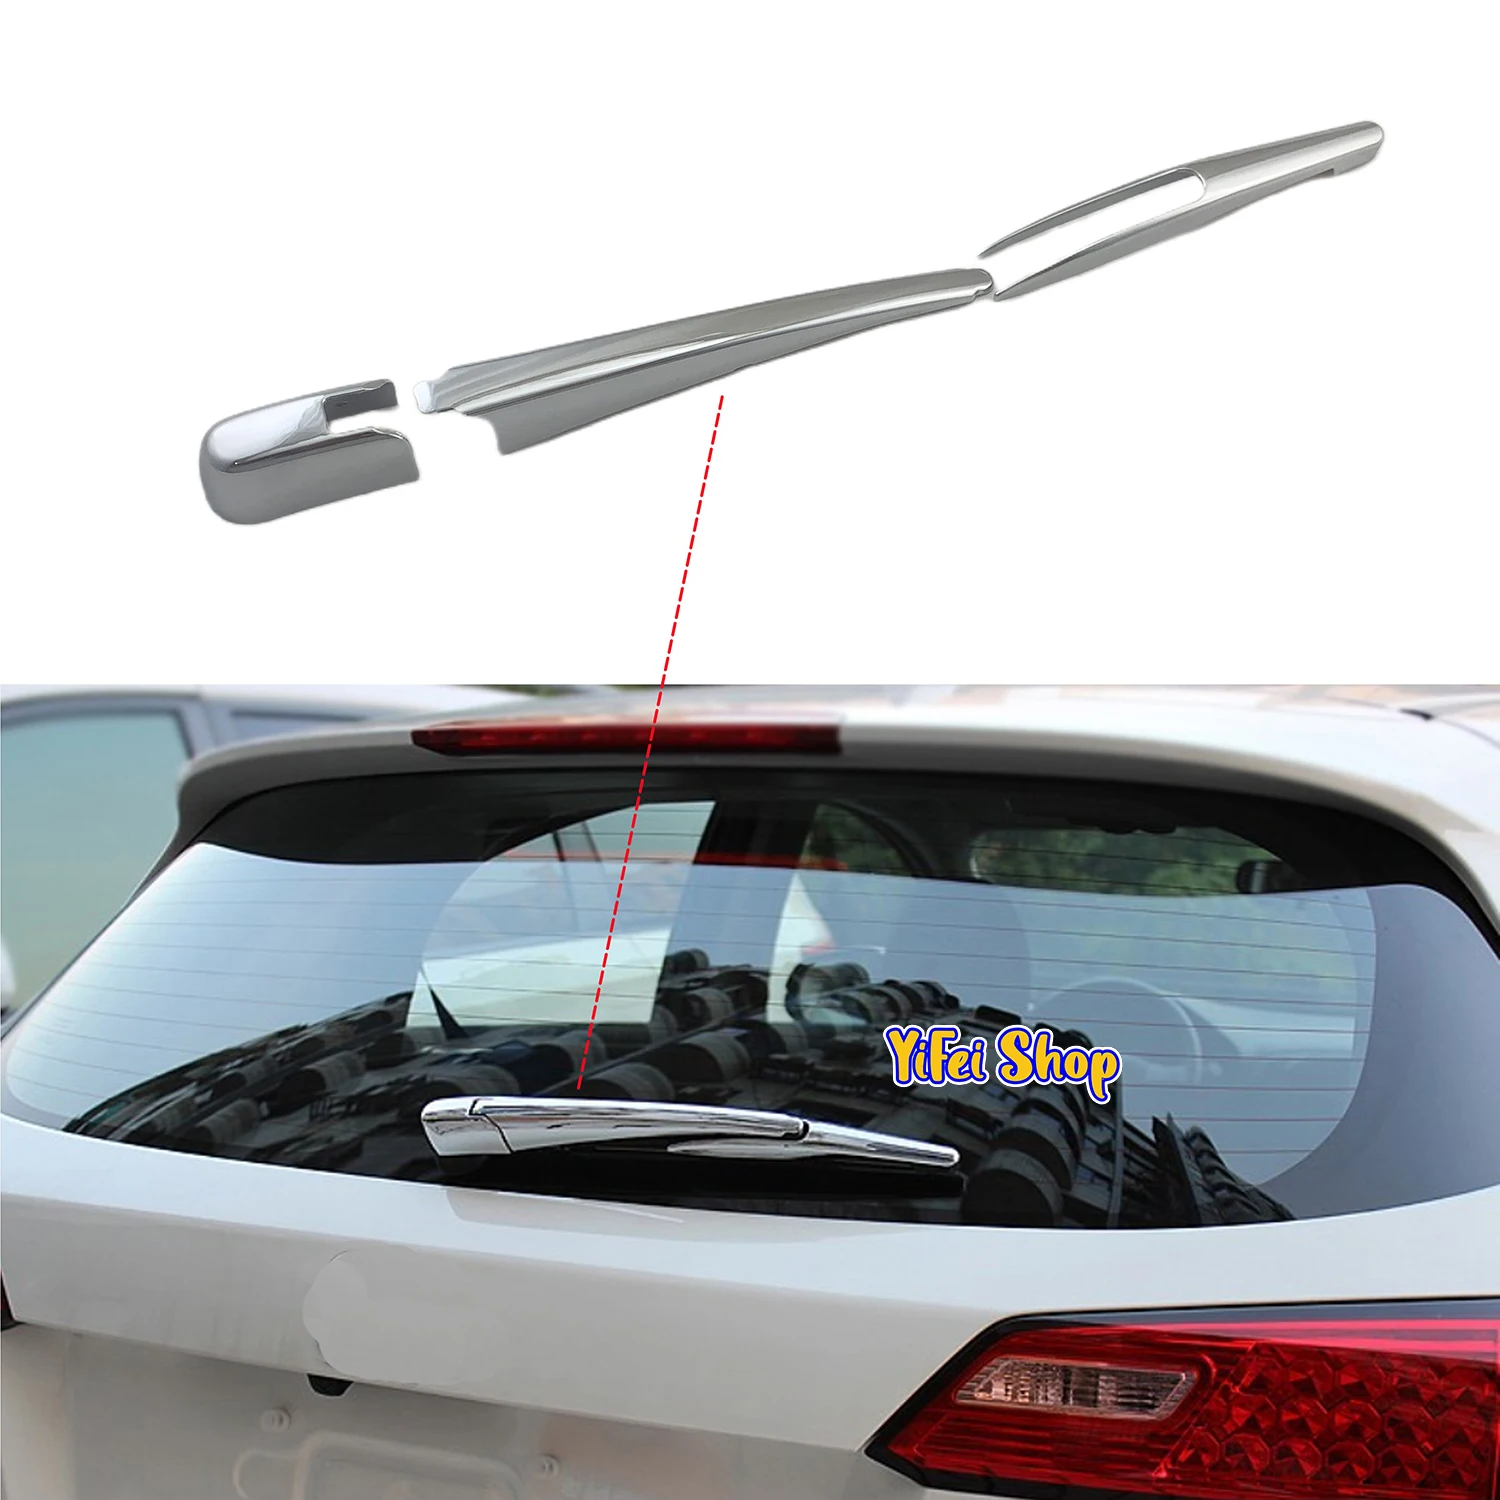 

New Car ABS Chrome Accessories Plated Rear Windshield Wipers Cover Trim Paste Style For Honda HRV HR-V Vezel 2014 2016 2017 2018